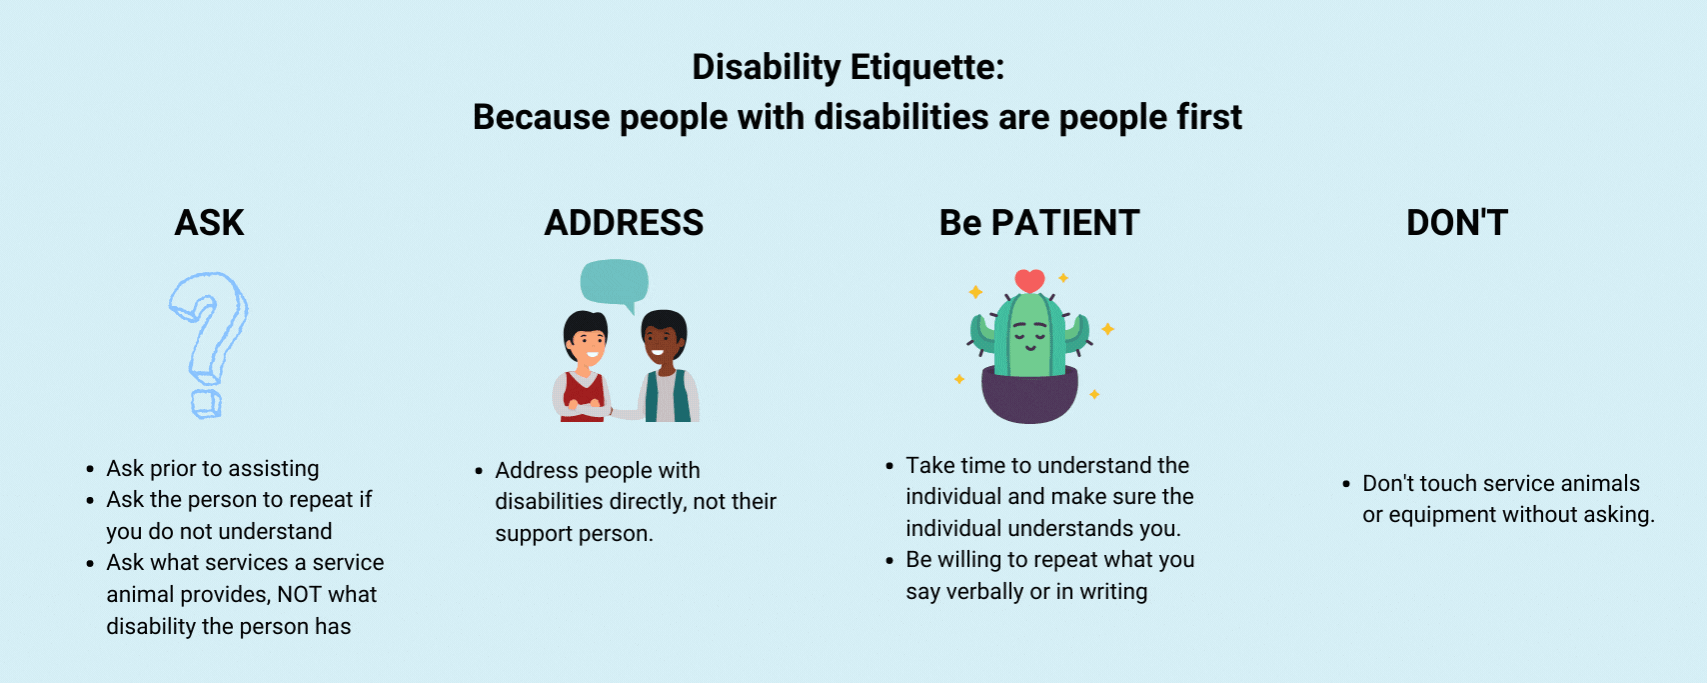 Disability Etiquette: Because people with disabilities are people first. Ask prior to assisting, ask the person to repeat if you do not understand, ask what services a service animal provides, NOT what disability the person has. ADDRESS: Address disabled people directly, not either support person. be PATIENT: Take time to understand the individual and make sure the individual understands you. Be willing to repeat what you say verbally or in writing. DON'T: Don't touch service animals or equipment without asking